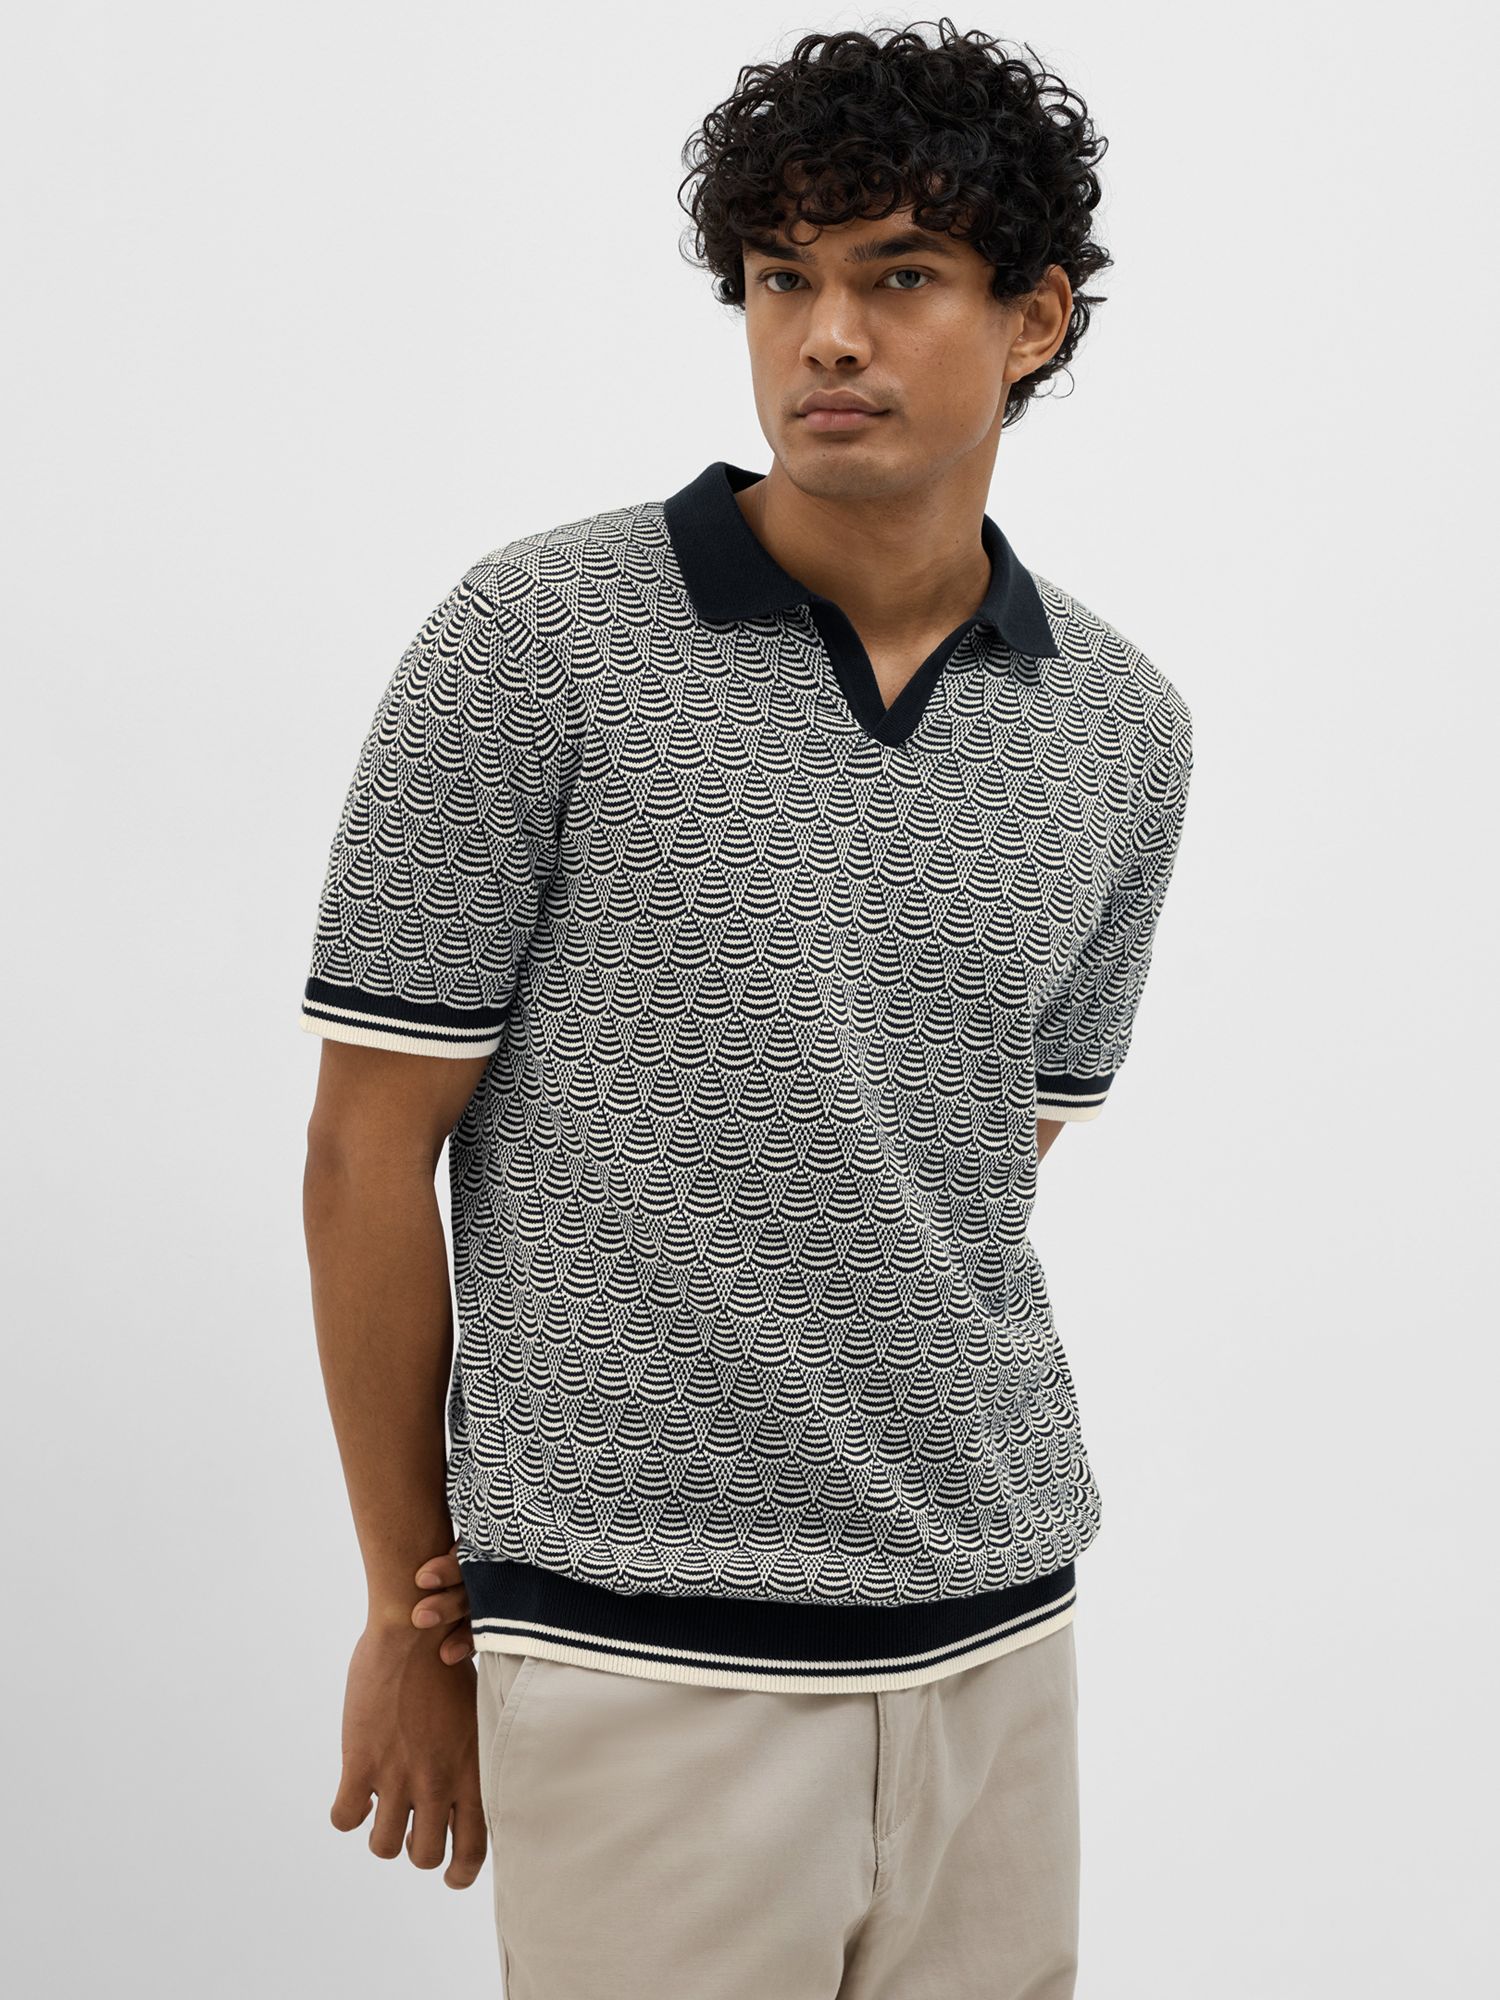 Buy SELECTED HOMME Geometric Knit Polo Shirt Online at johnlewis.com